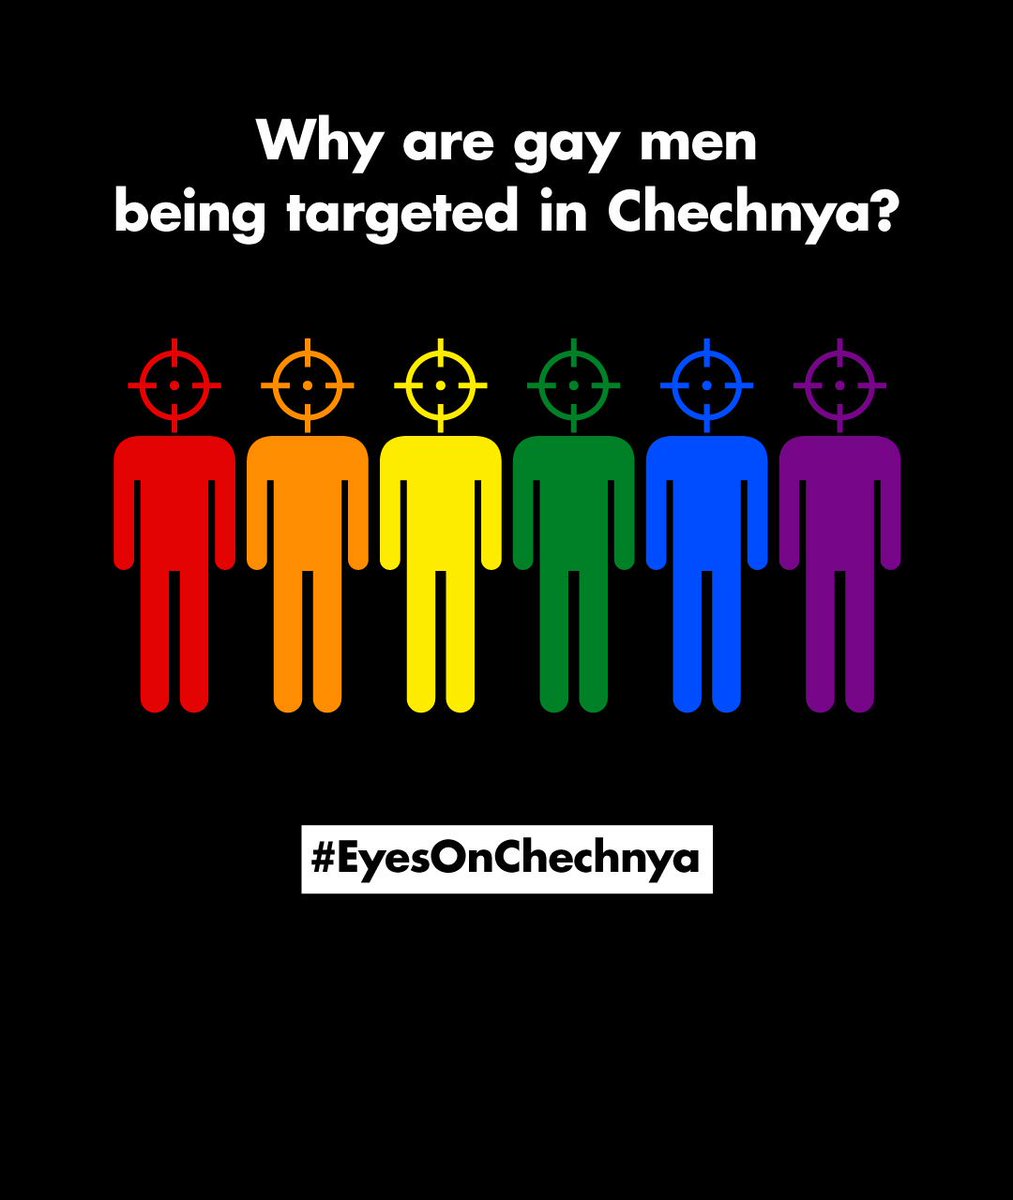 I have my #EyesOnChechnya but do you? Demand justice for the gay and bi men being targeted: https://t.co/4VPlaRKn55 https://t.co/578zh9ylSU